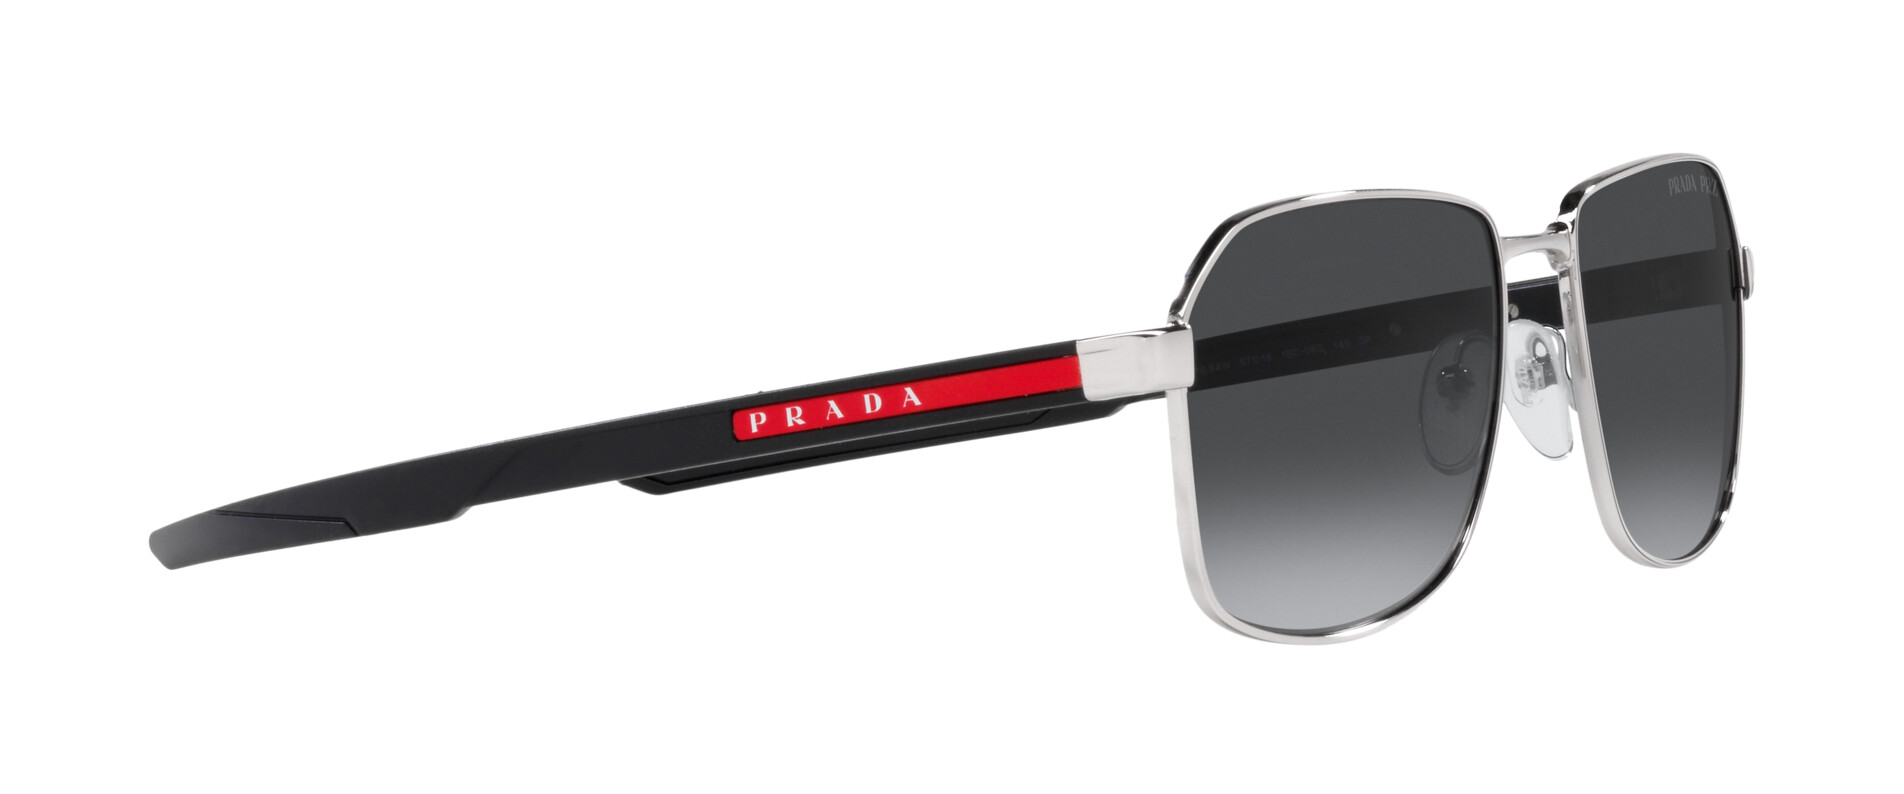 [products.image.promotional03] Prada Linea Rossa 0PS 54WS 1BC06G Sonnenbrille